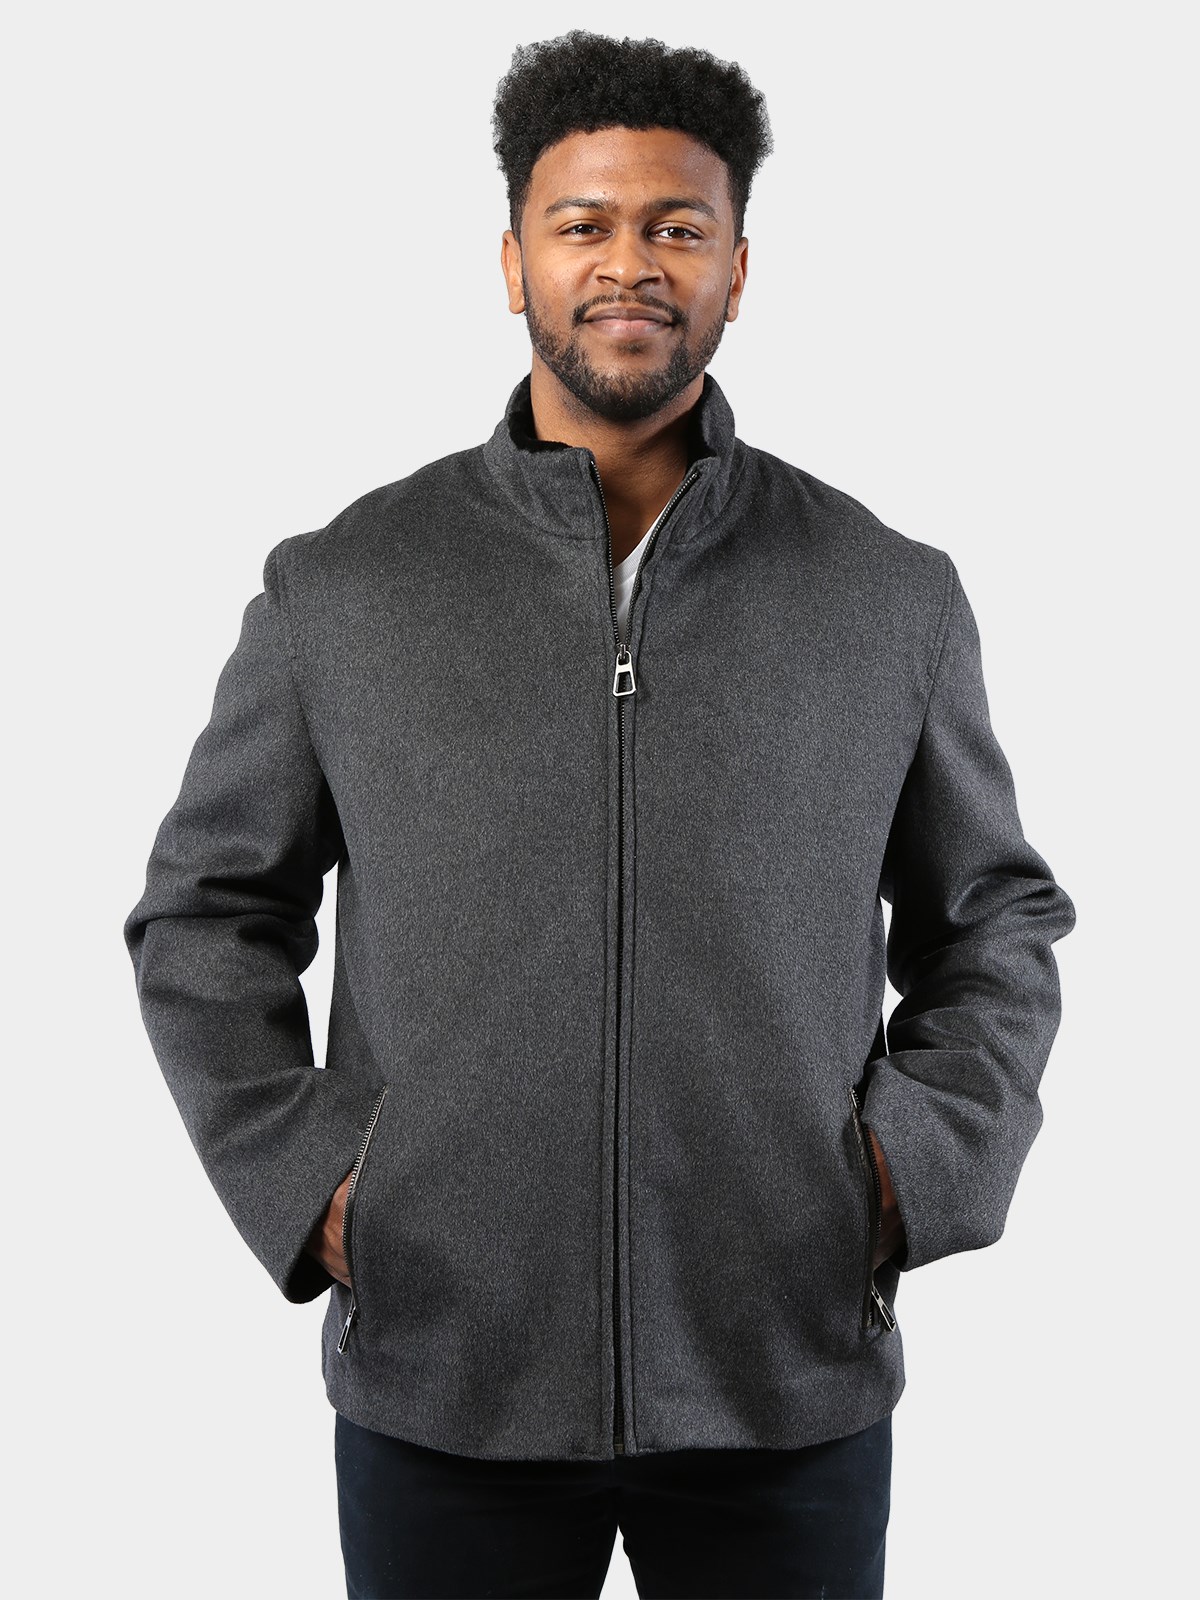 Man's Gray Wool Jacket with Black Astra Shearling Lining